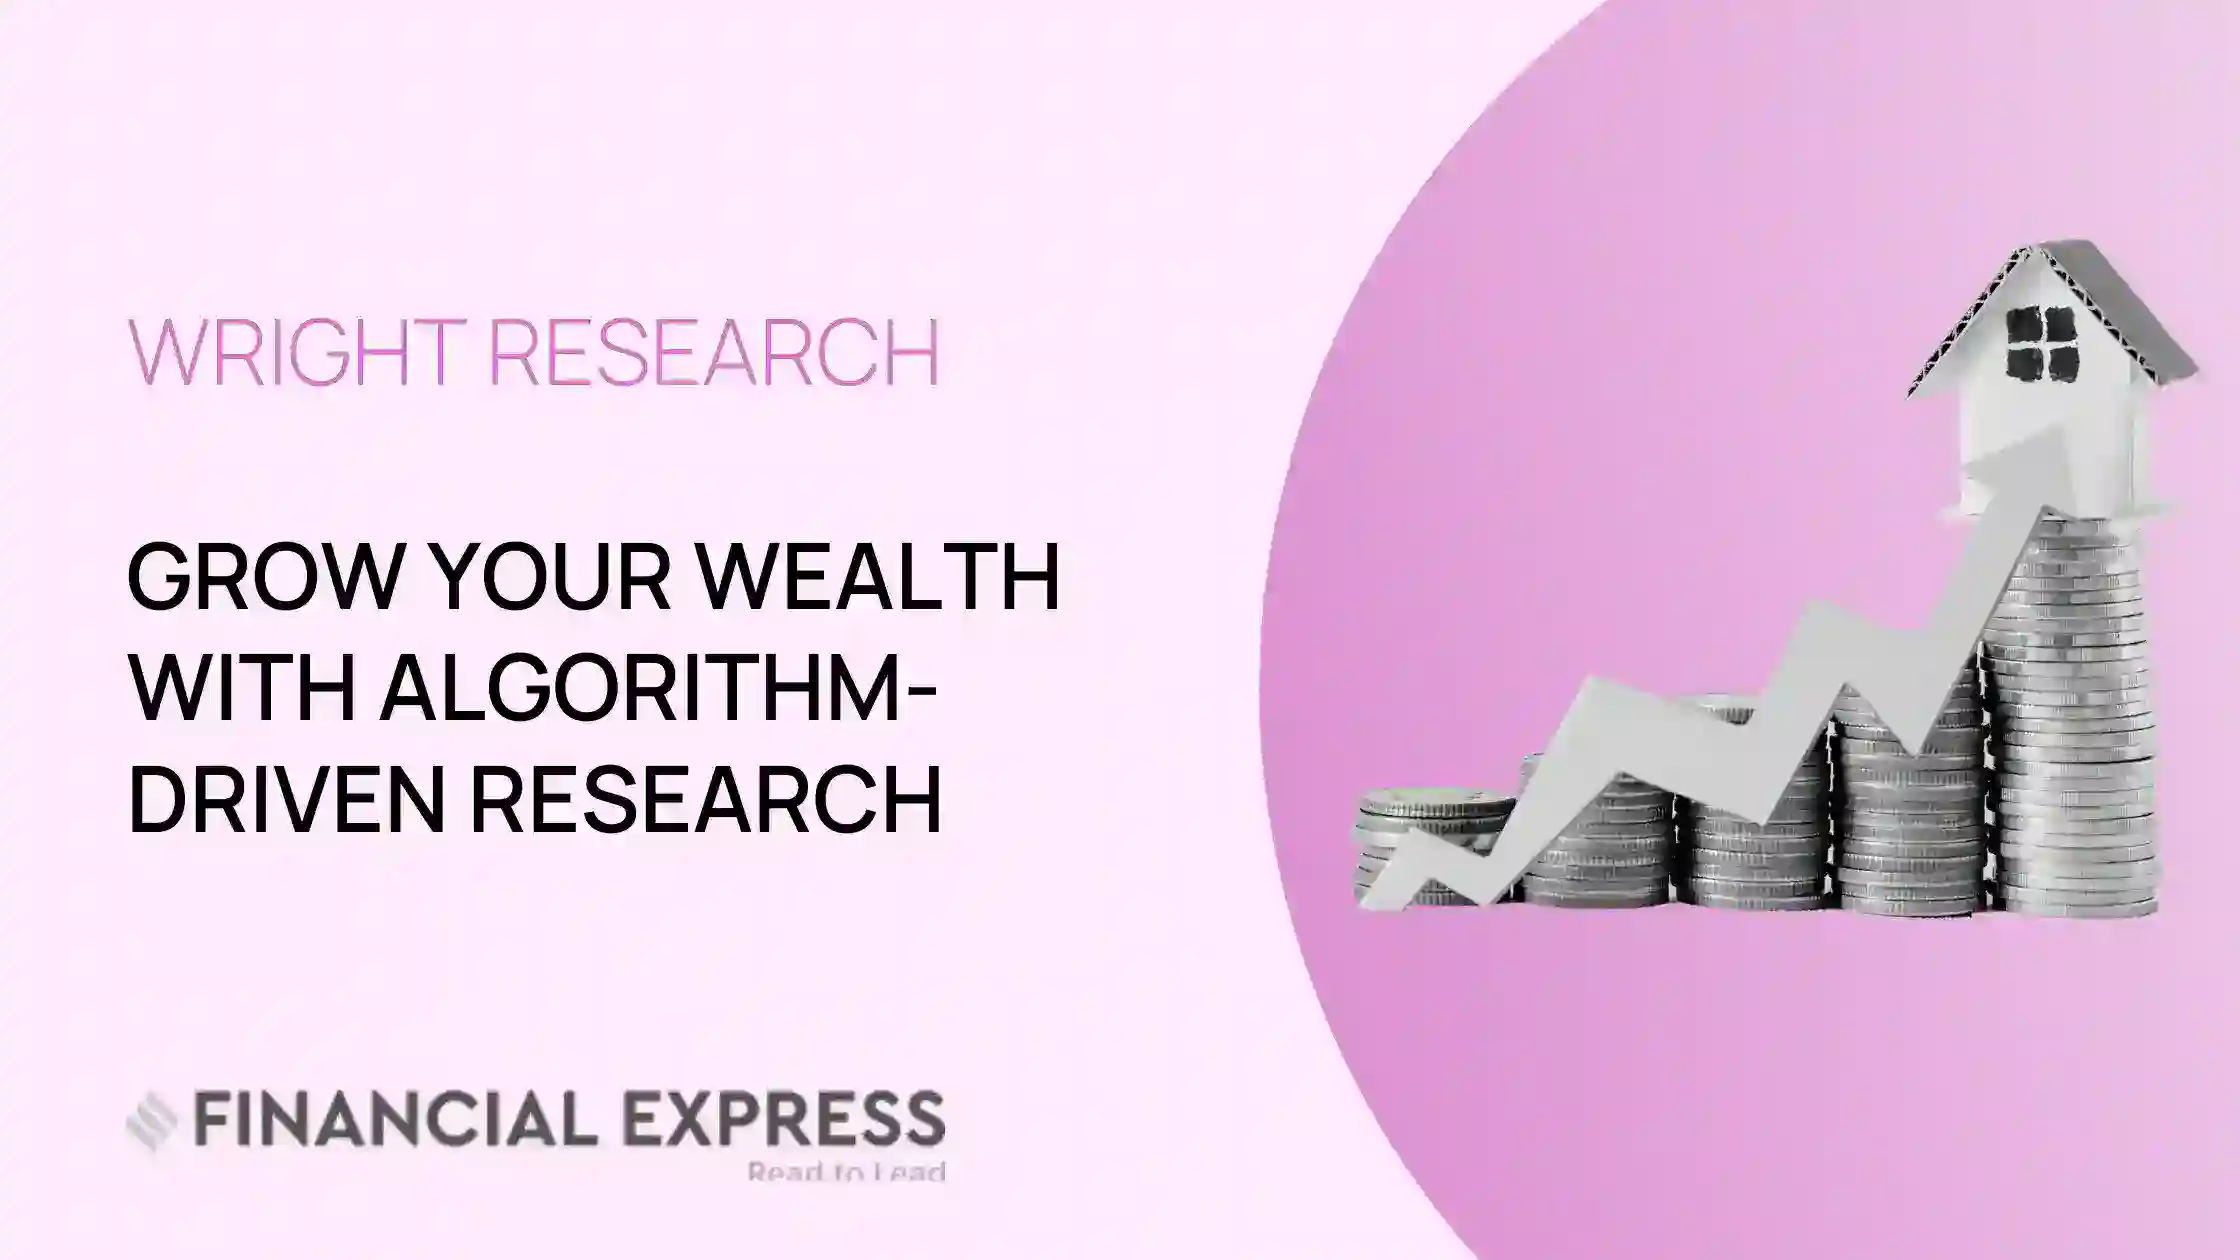 WRIGHT RESEARCH: Grow your wealth with algorithm-driven research